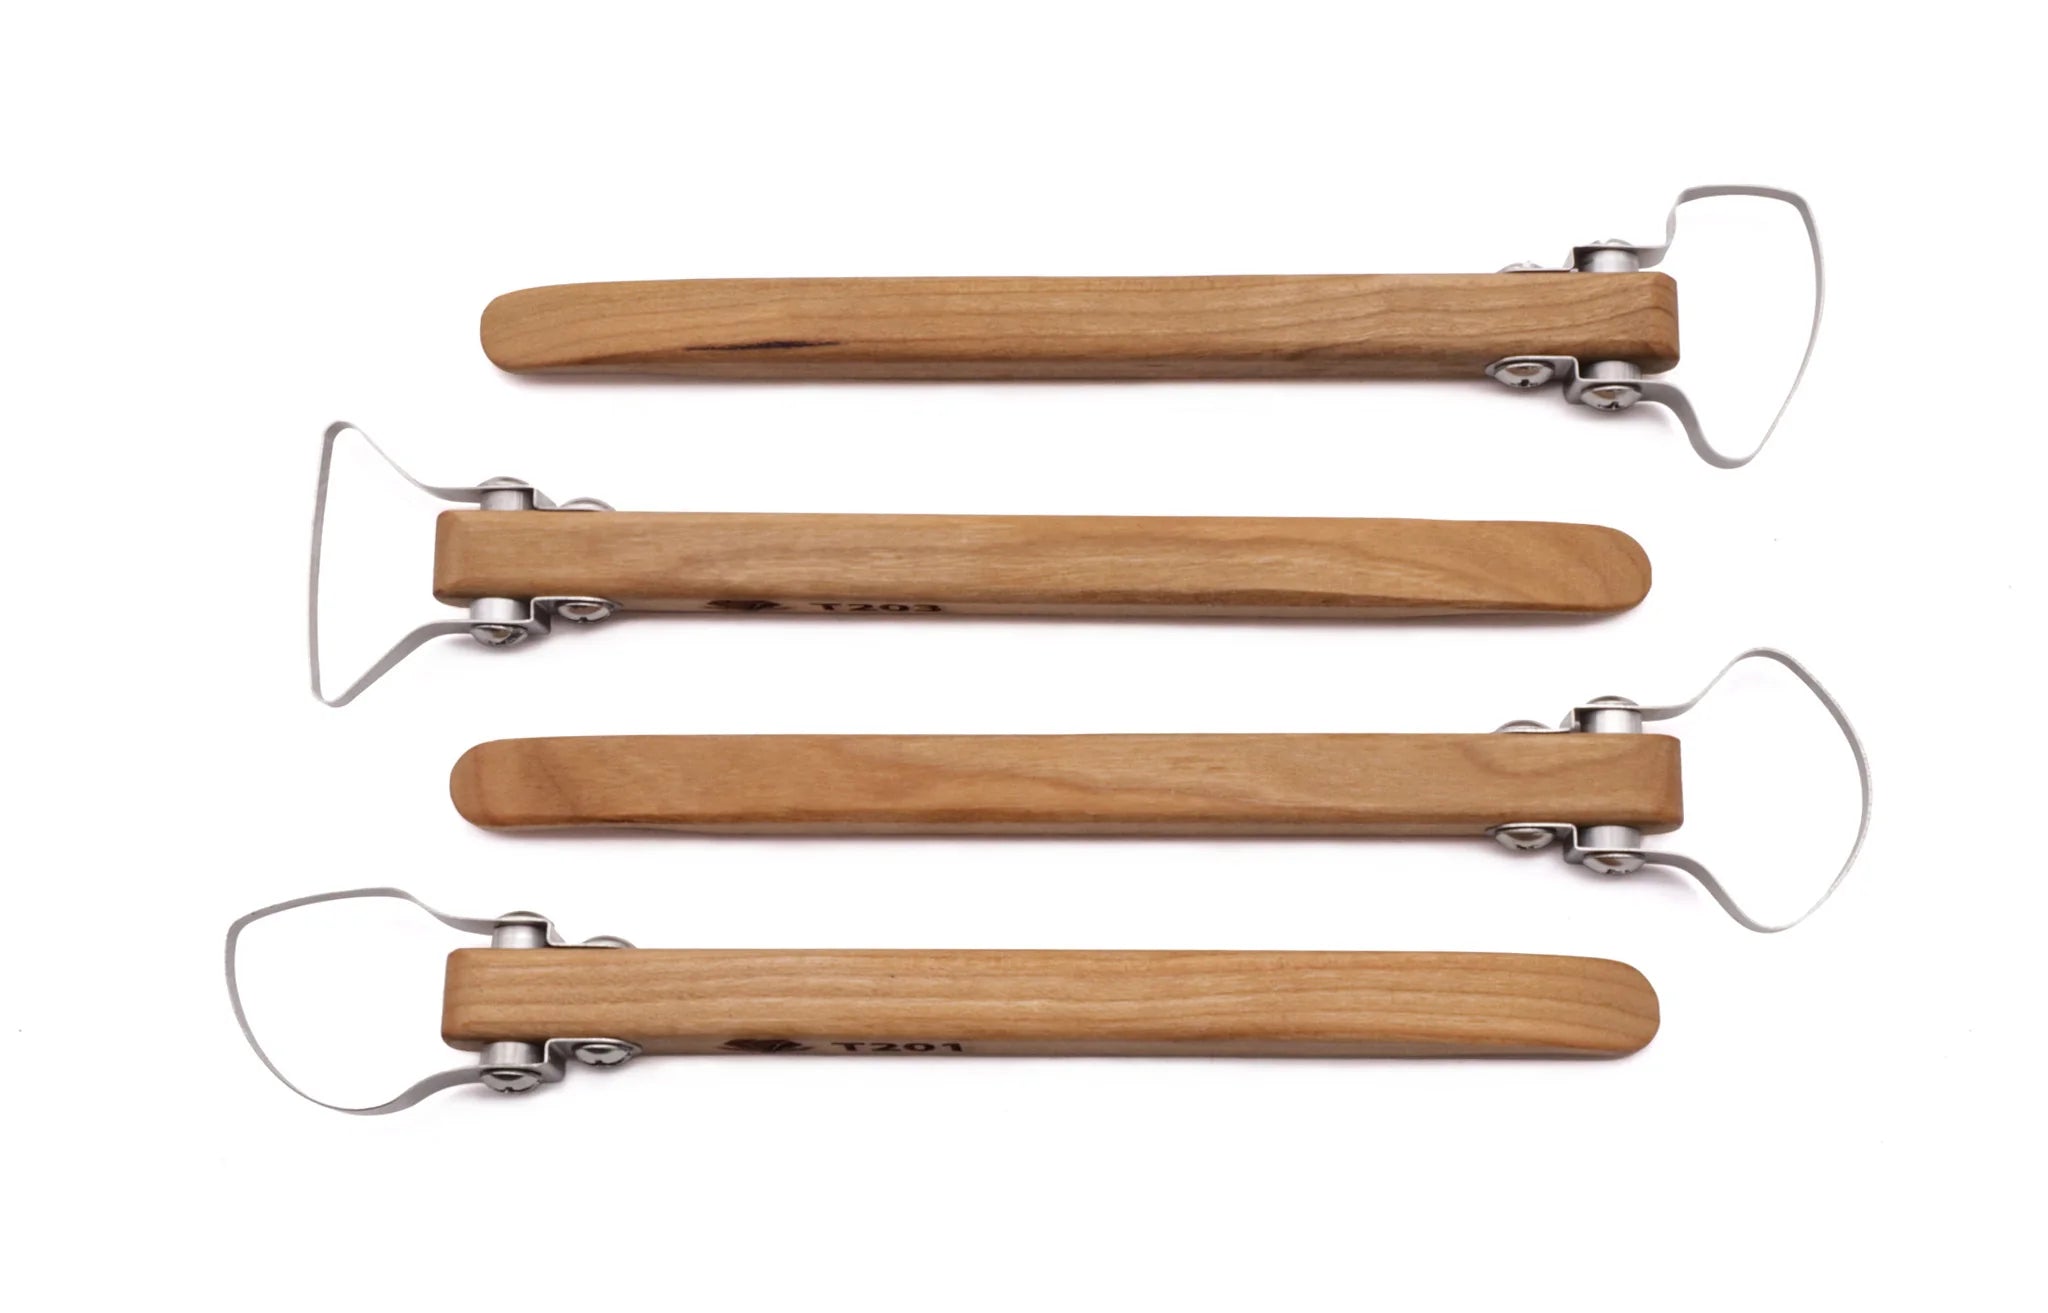 4-Piece Extra-Large Trimming Tools Set 1 (T201, T202, T203, T204)